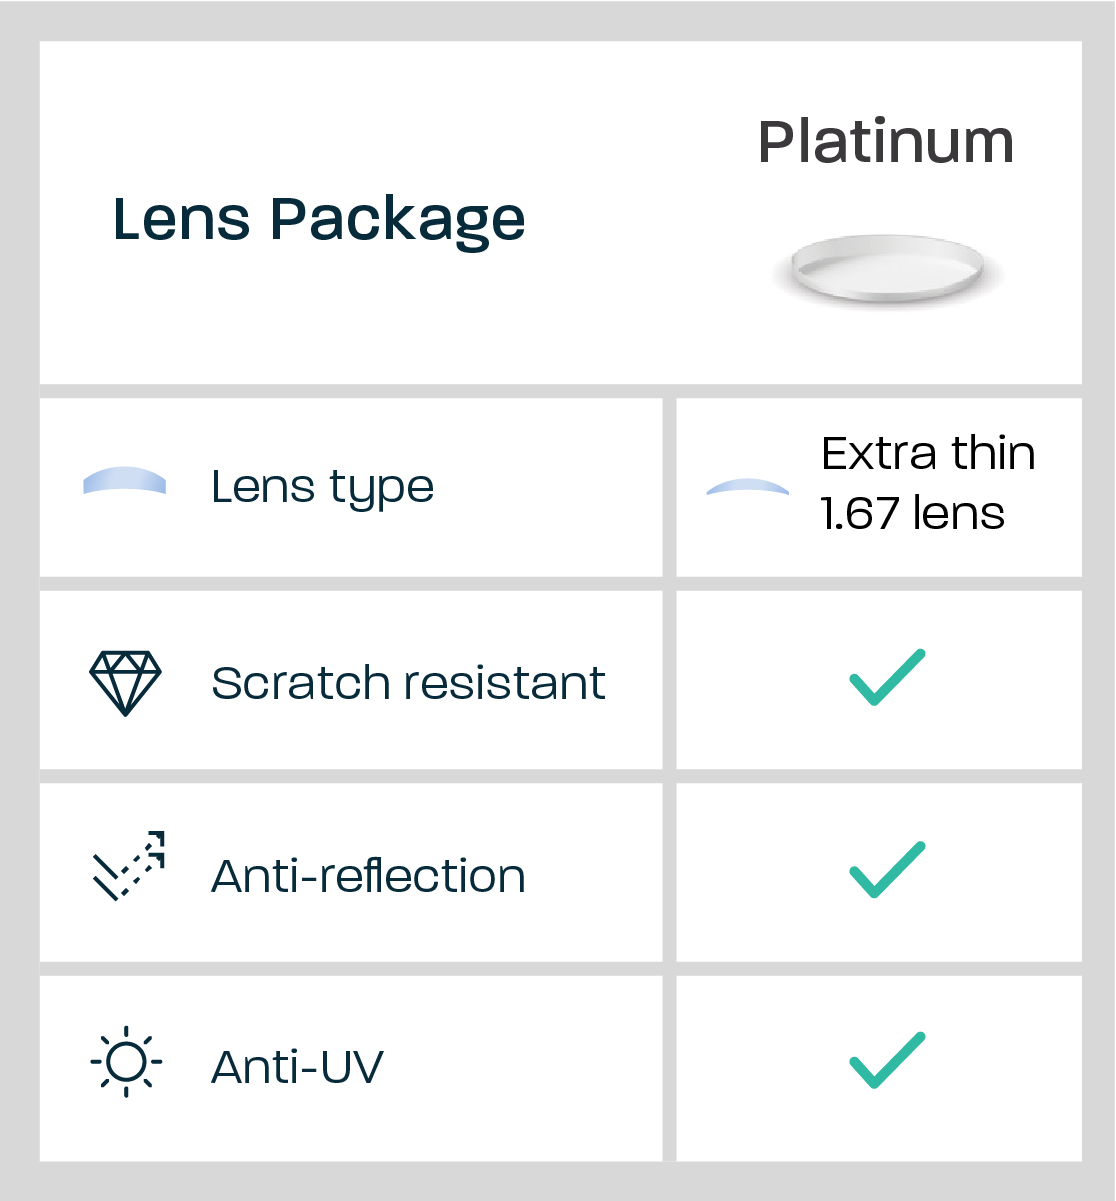 Platinum Package features: extra thin lenses, scratch resistant, anti-reflection and anti-UV coatings